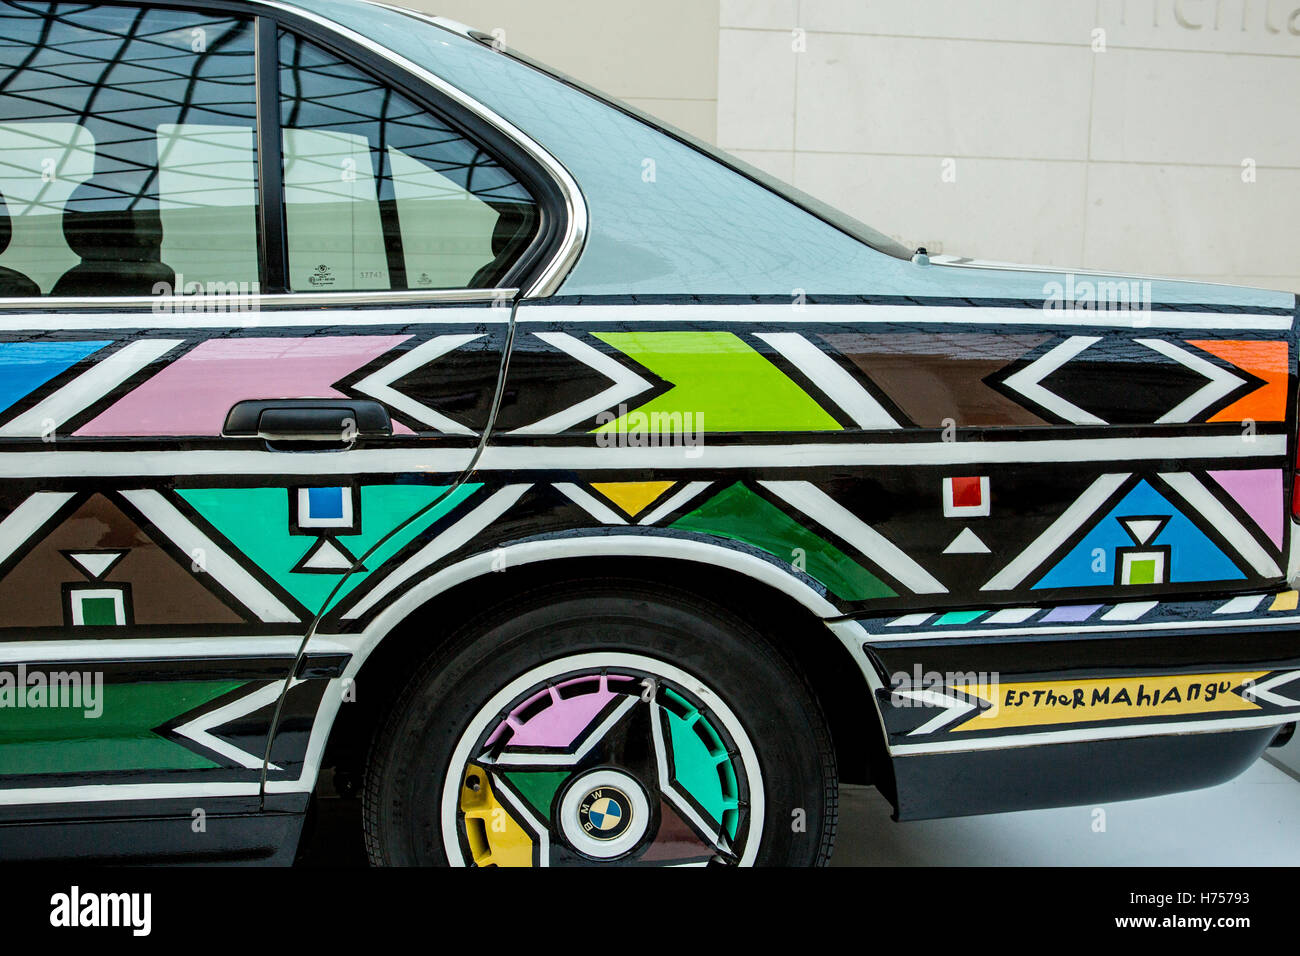 BMW Art Car created by Esther Mahlangu from South Africa At The